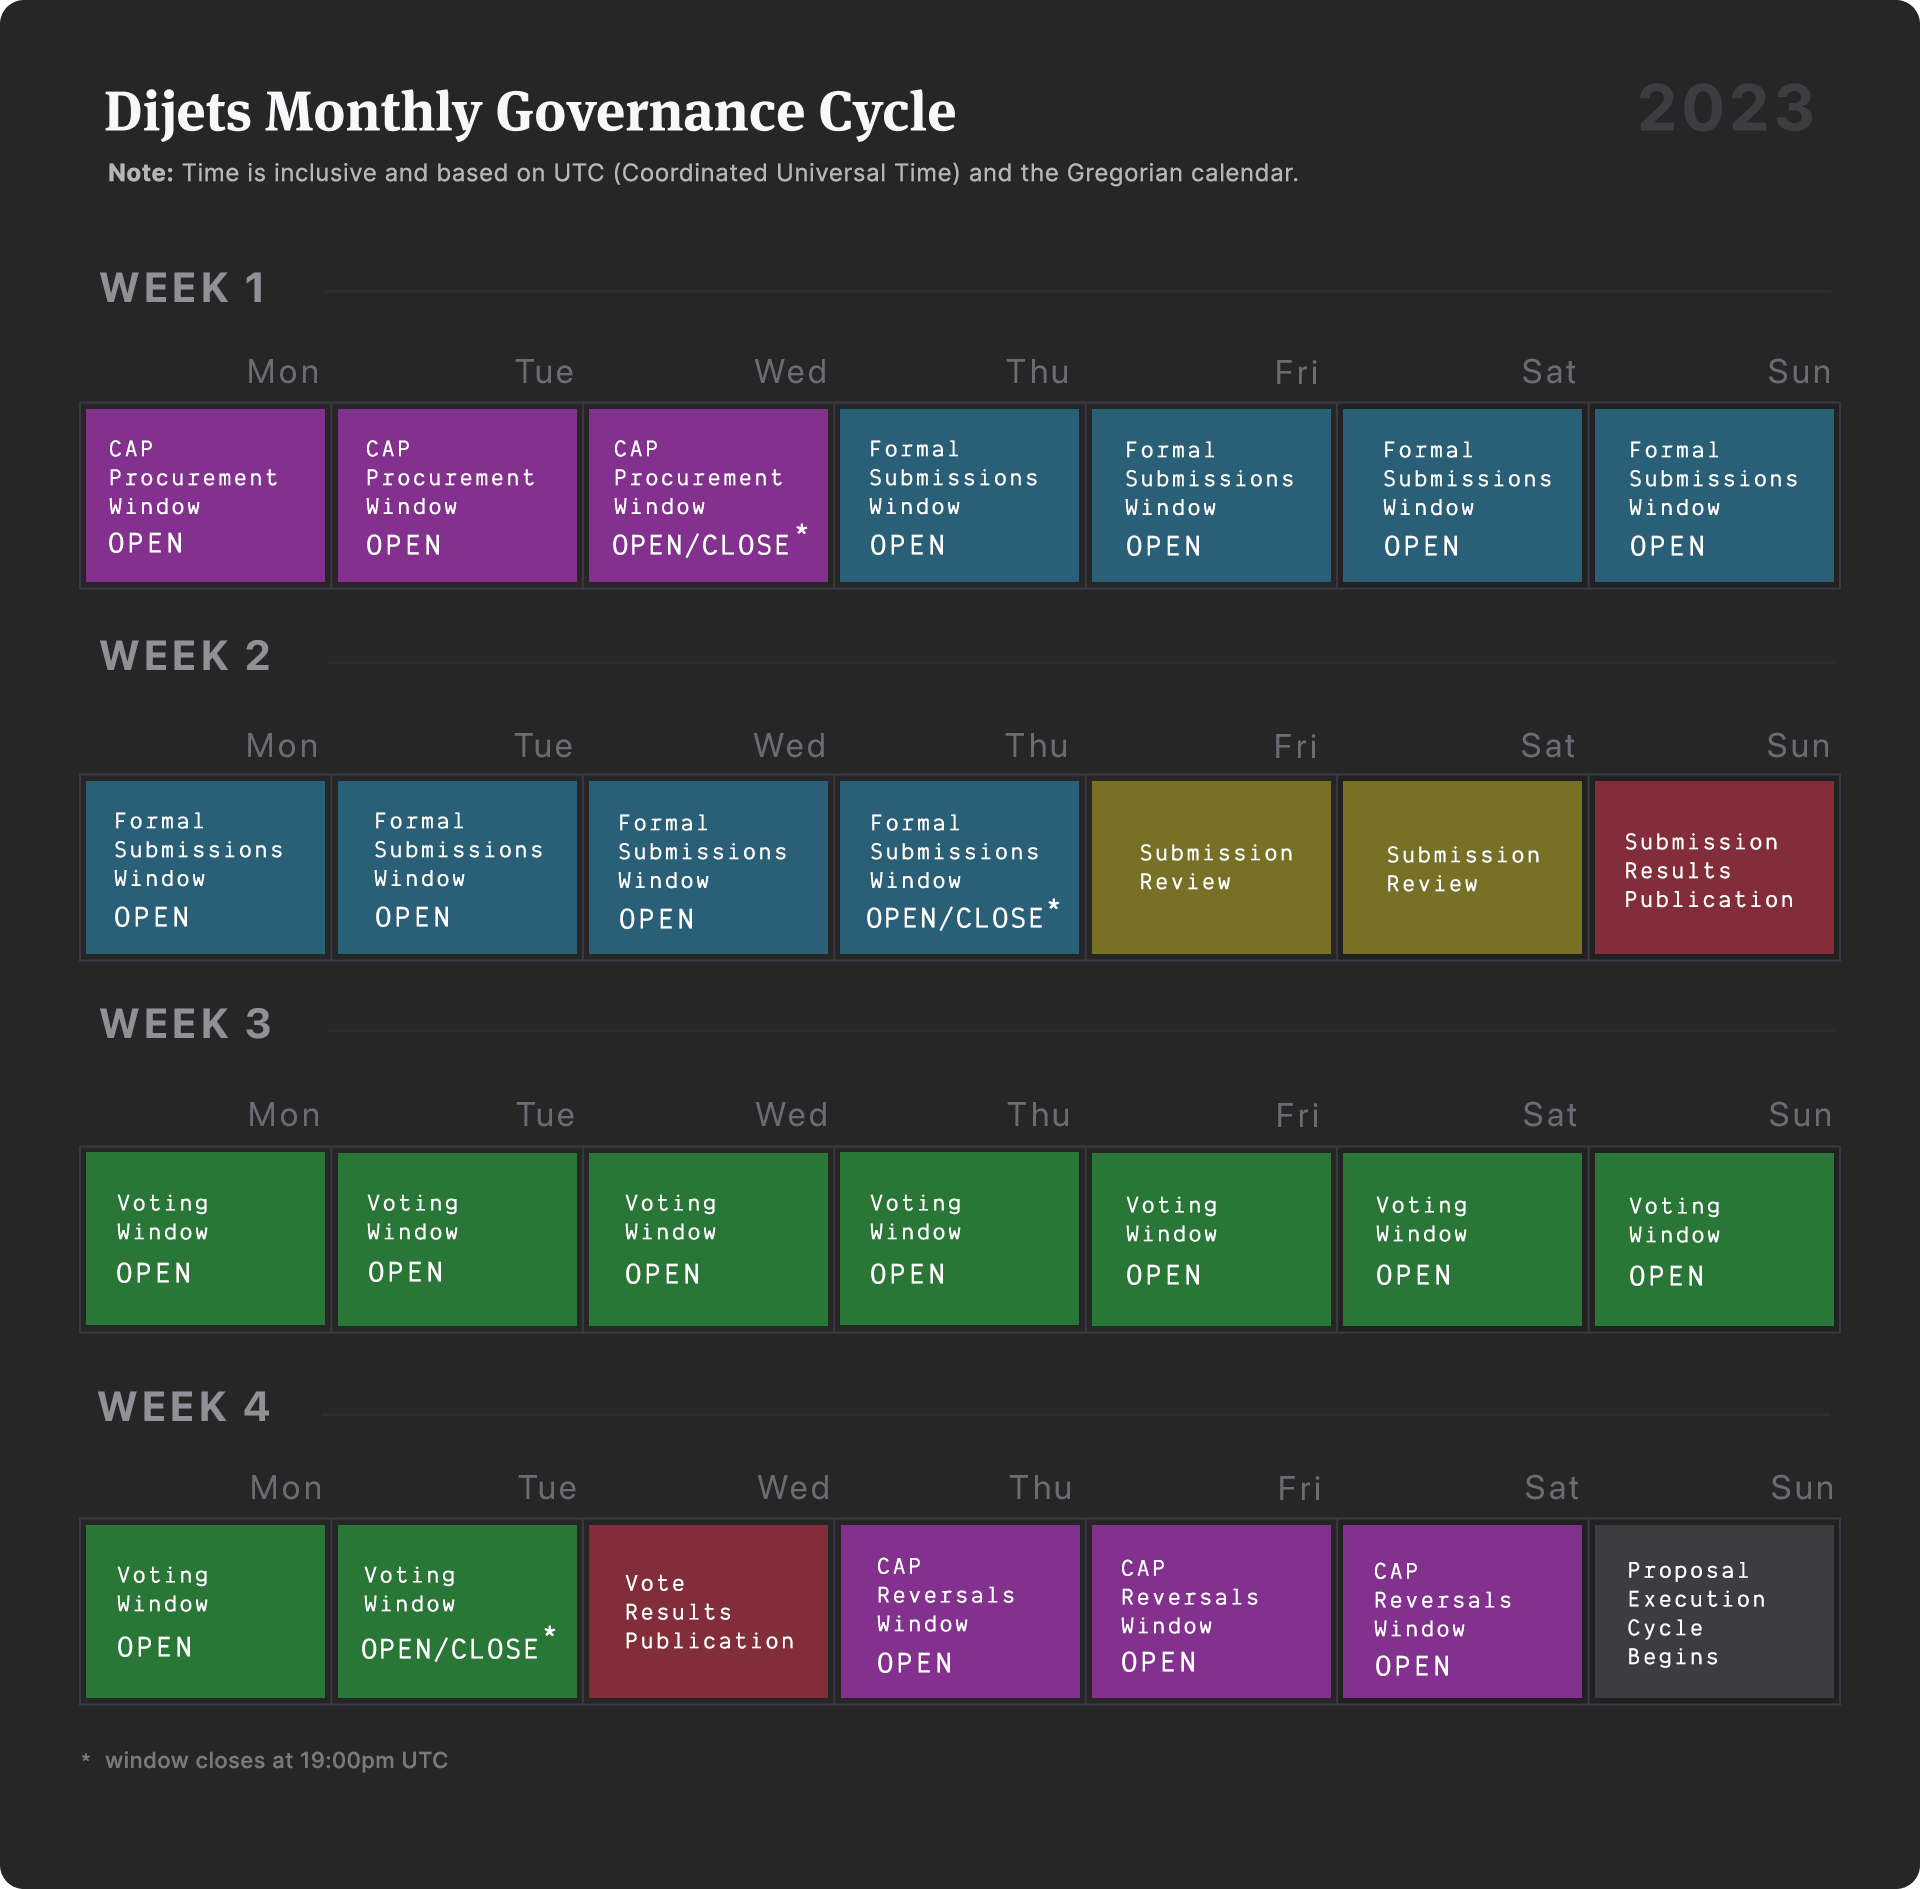 DGC Voting Monthly Cycle